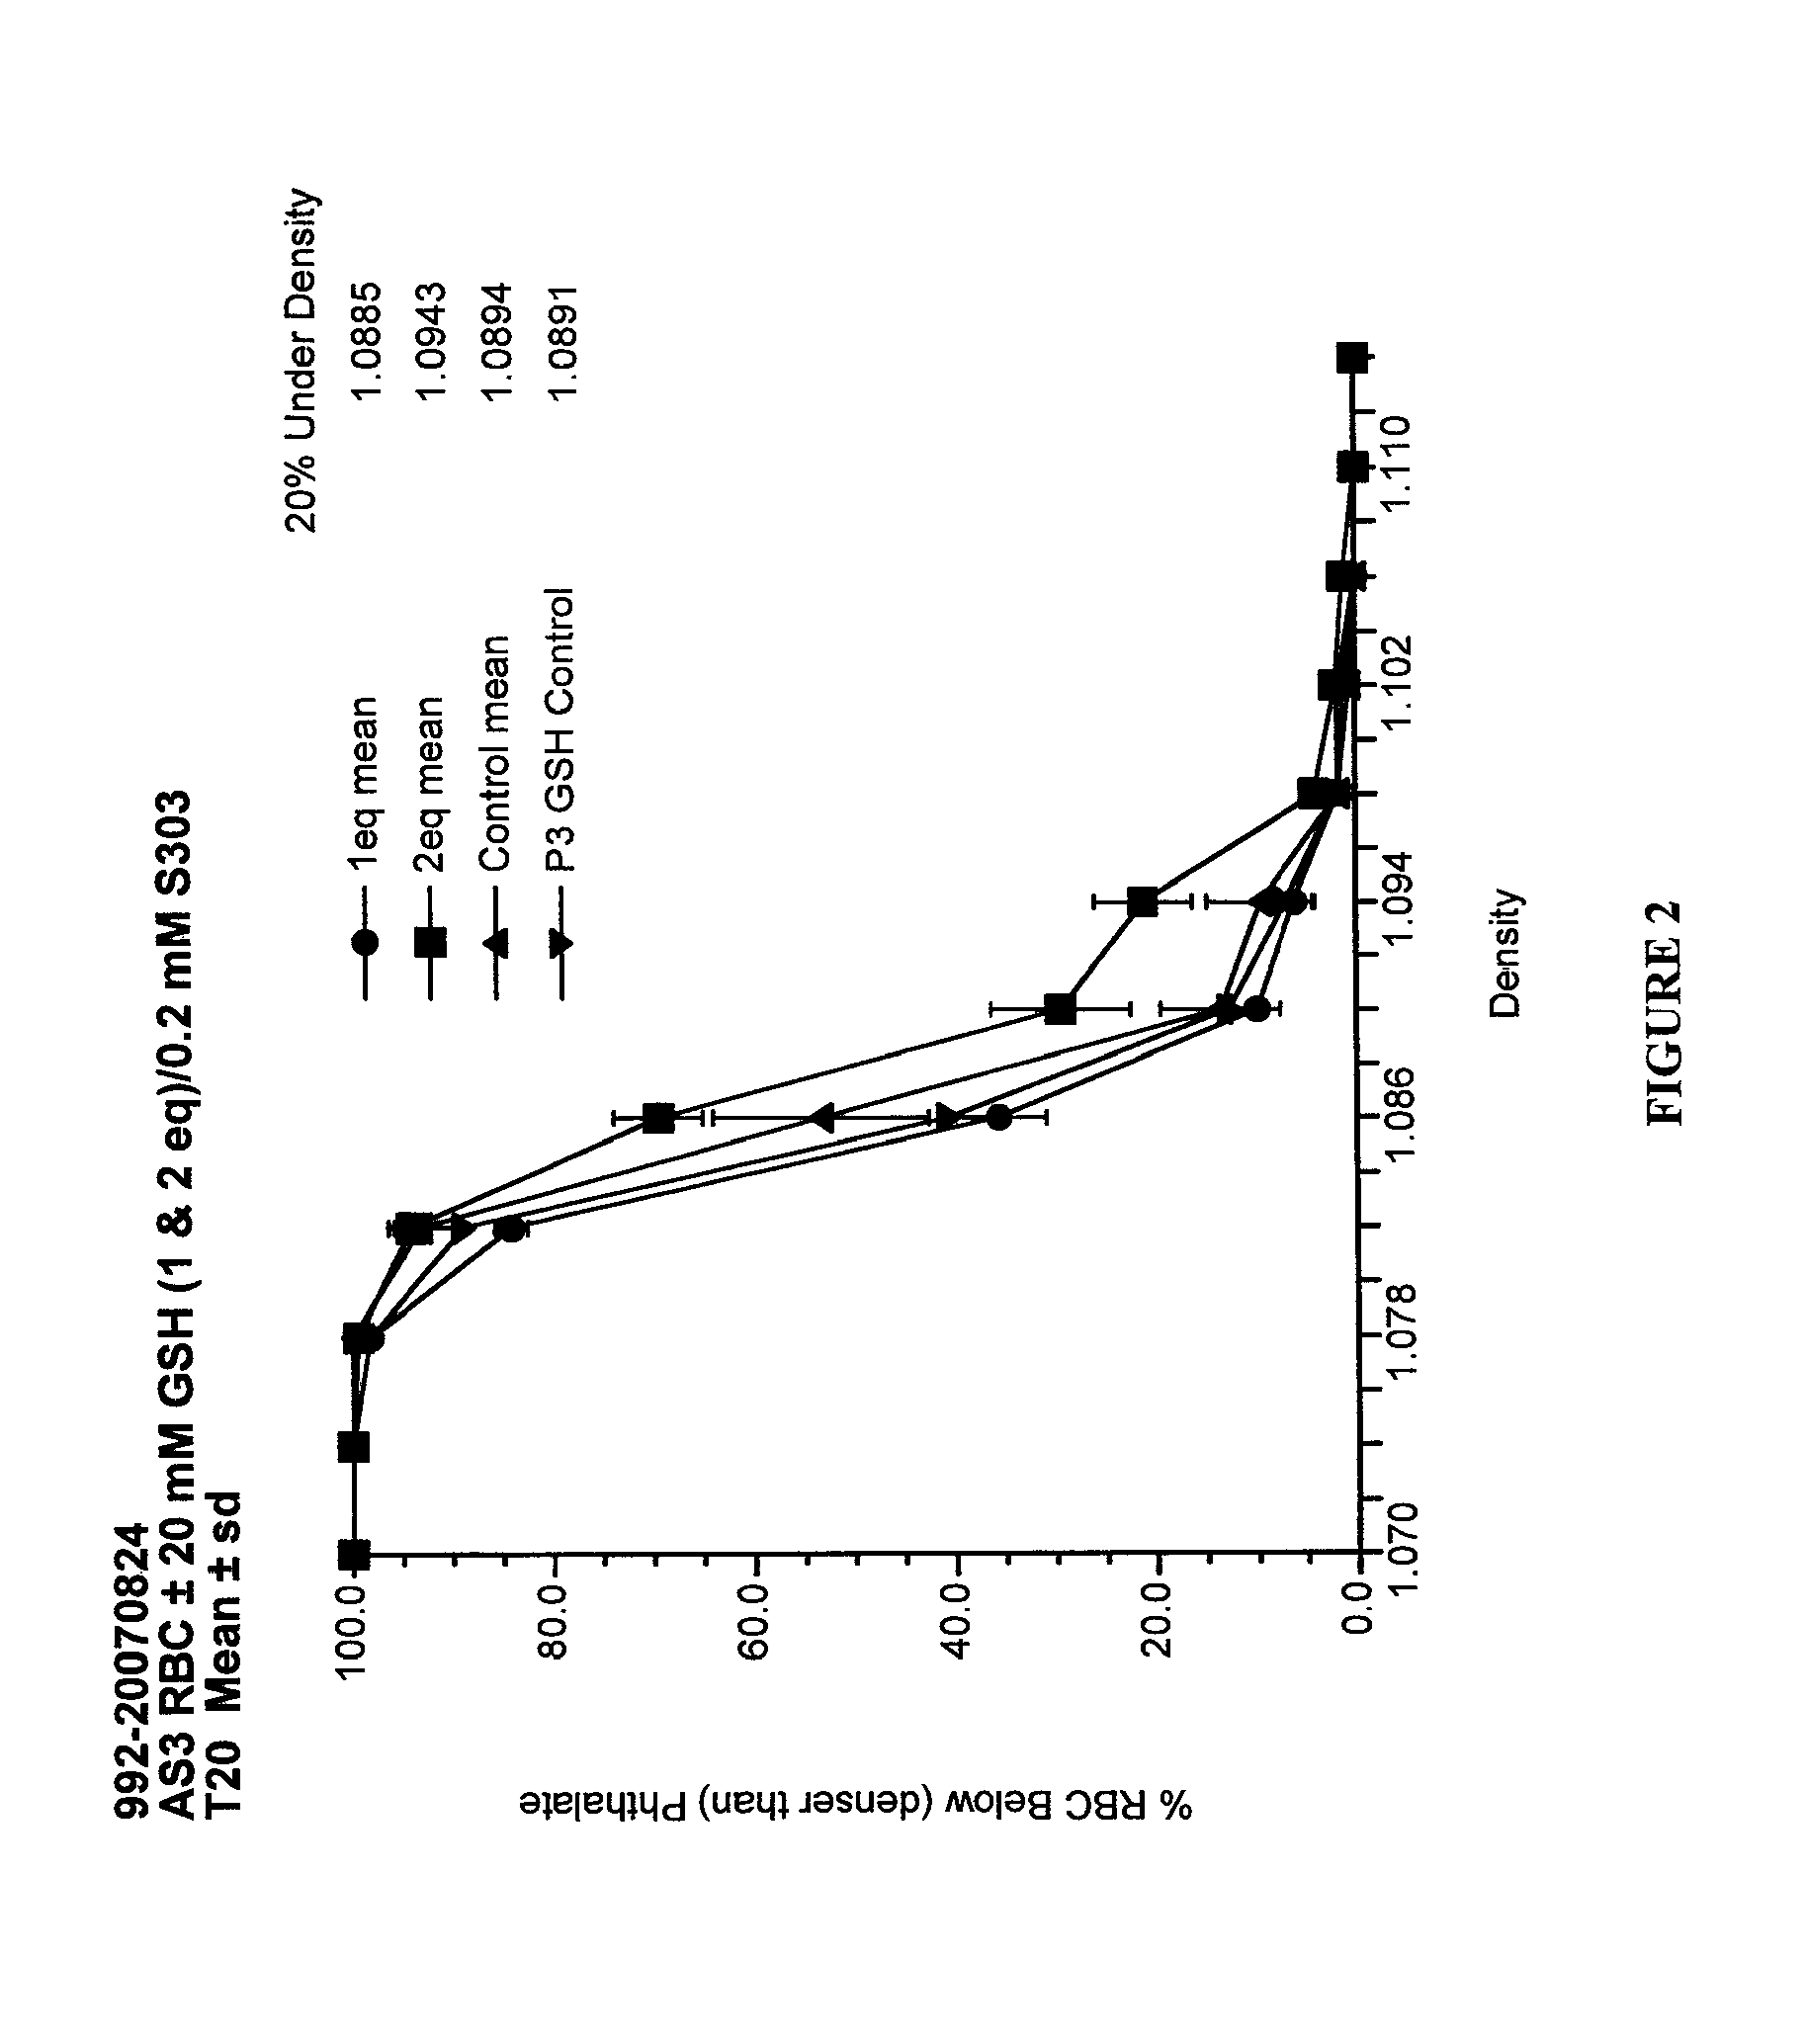 Quenching methods for red blood cell pathogen inactivation